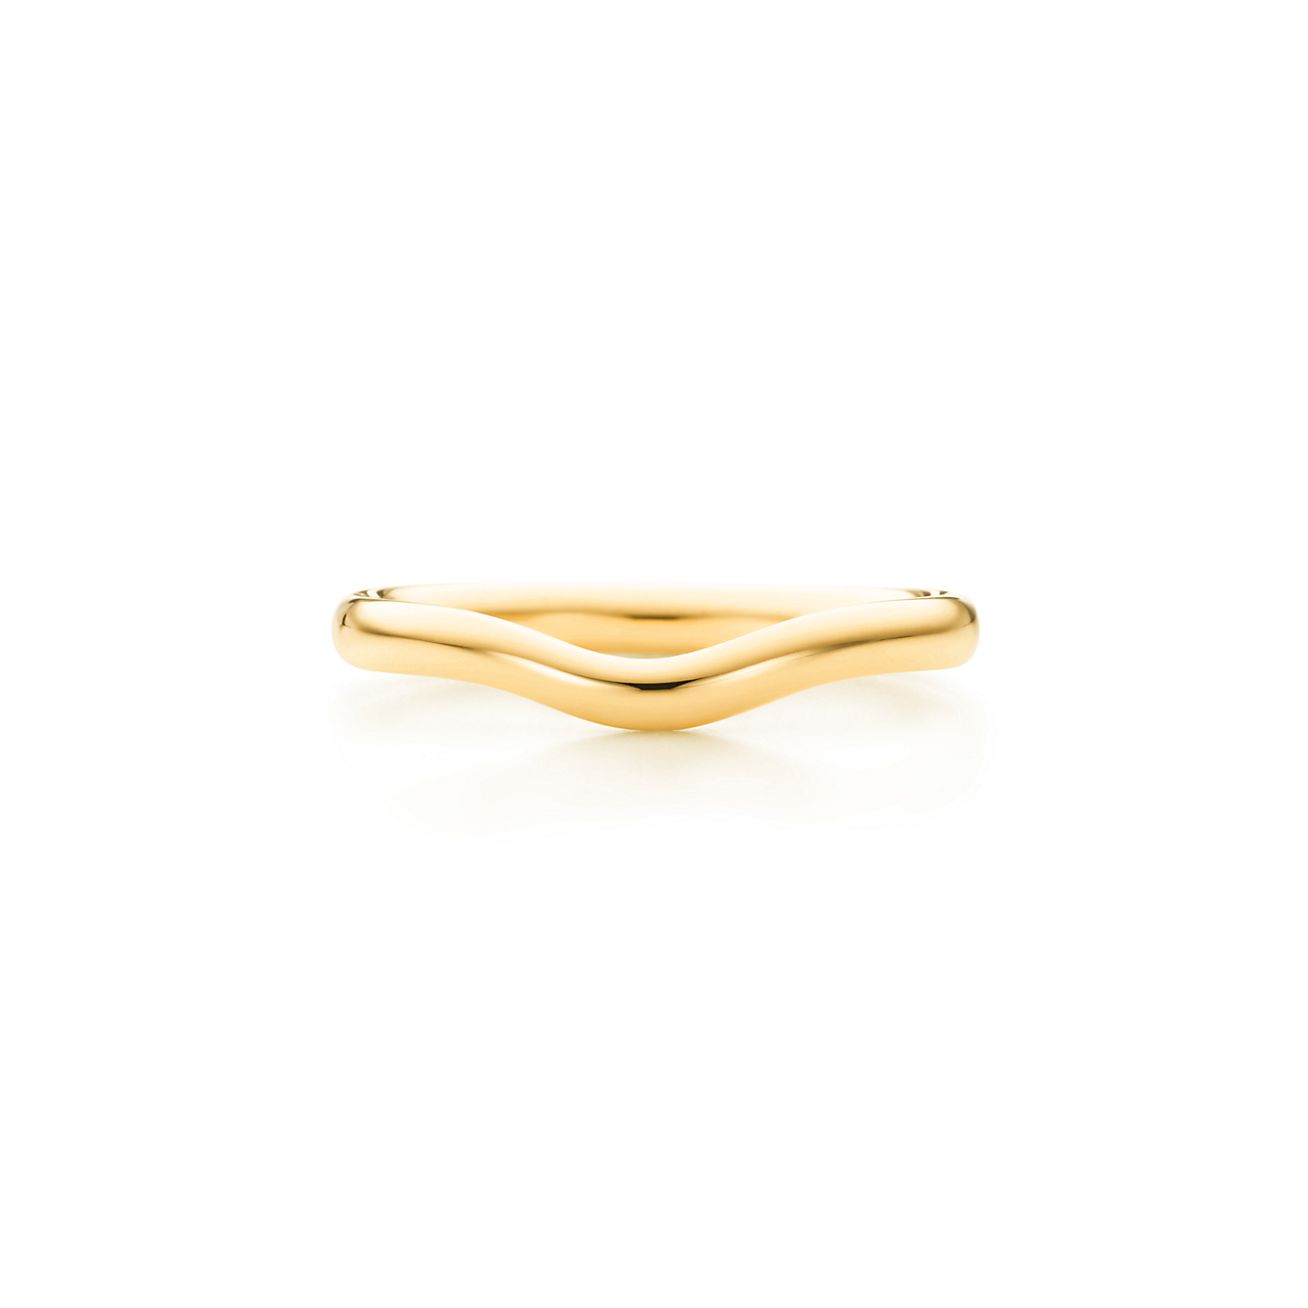 Elsa Peretti™ curved band ring in 18k gold, 2 mm wide. | Tiffany & Co.